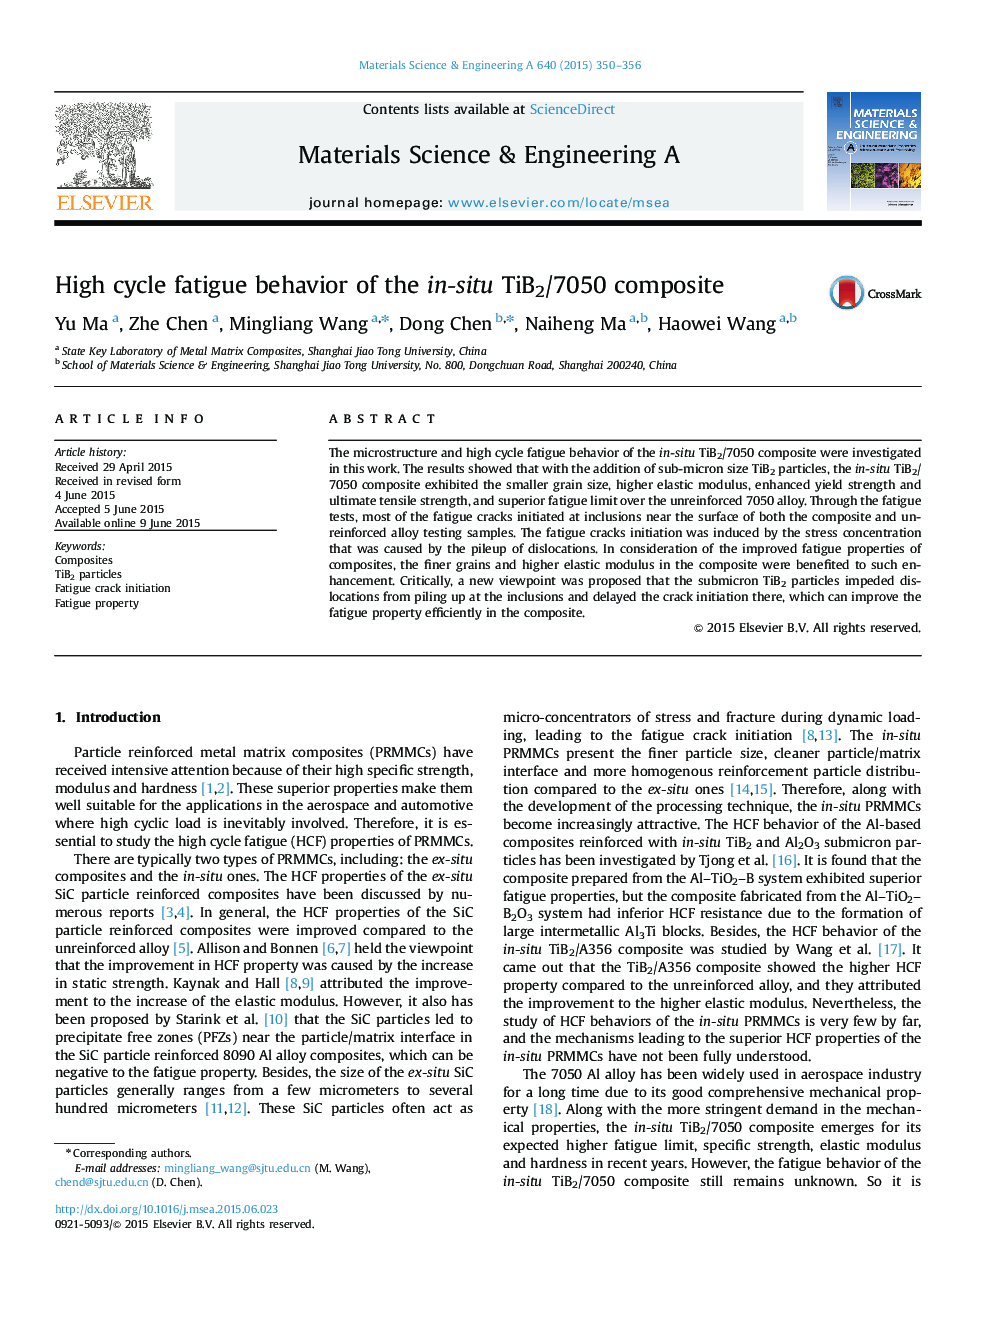 High cycle fatigue behavior of the in-situ TiB2/7050 composite